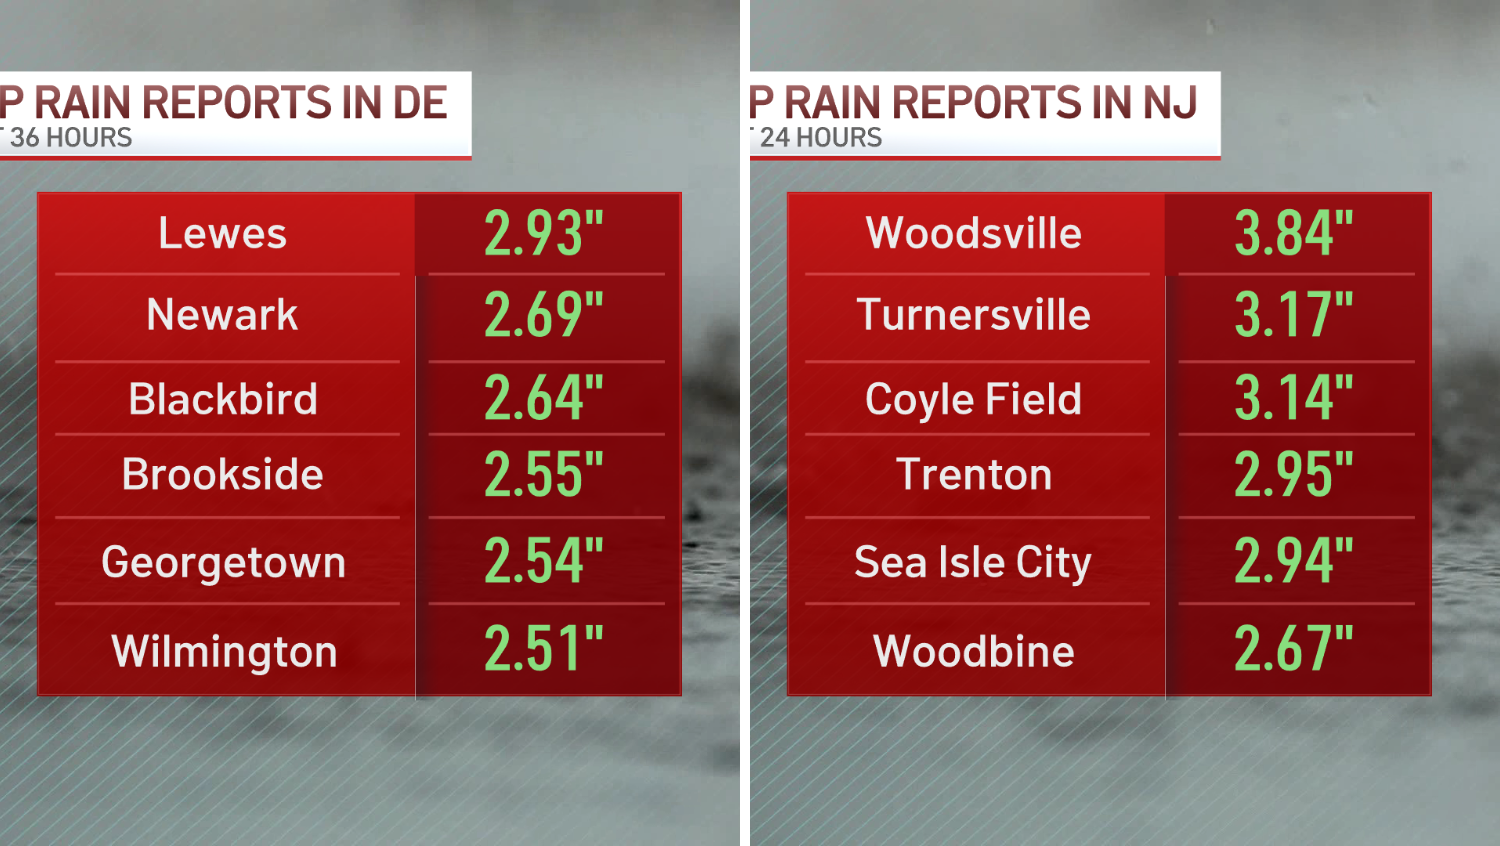 Graphics show rainfall totals in South Jersey and Delaware